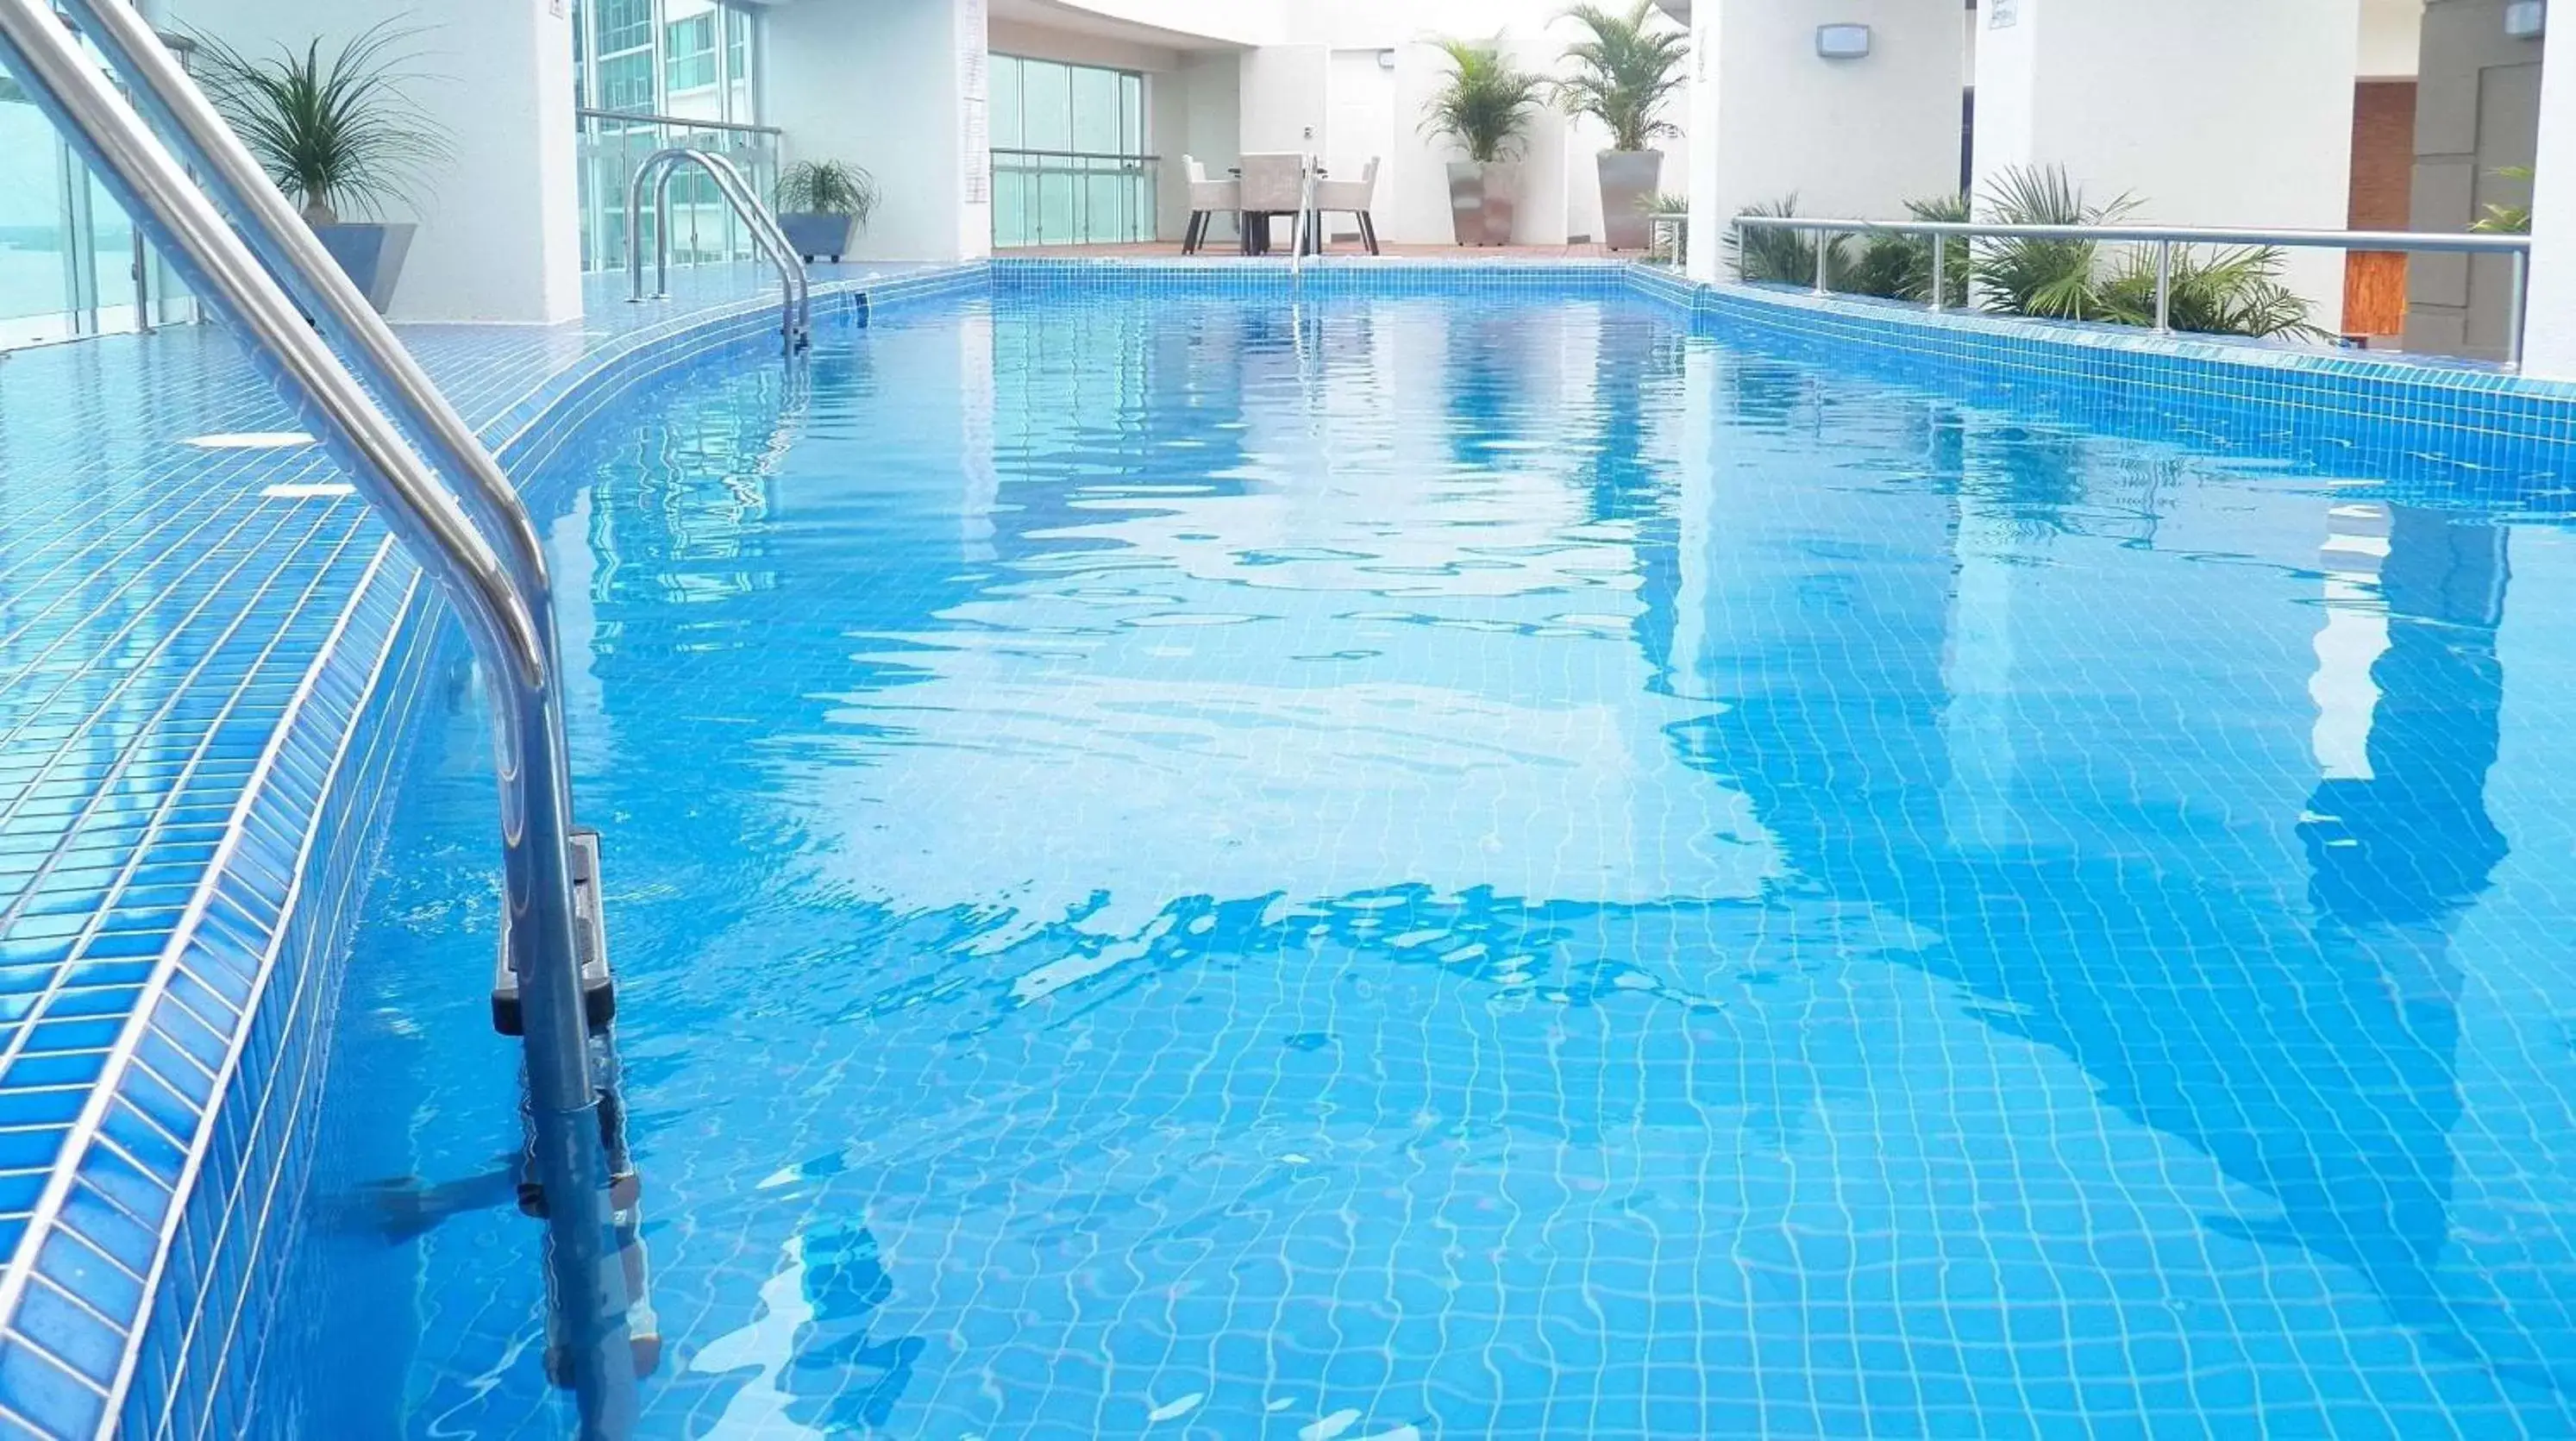 On site, Swimming Pool in Wyndham Guayaquil, Puerto Santa Ana